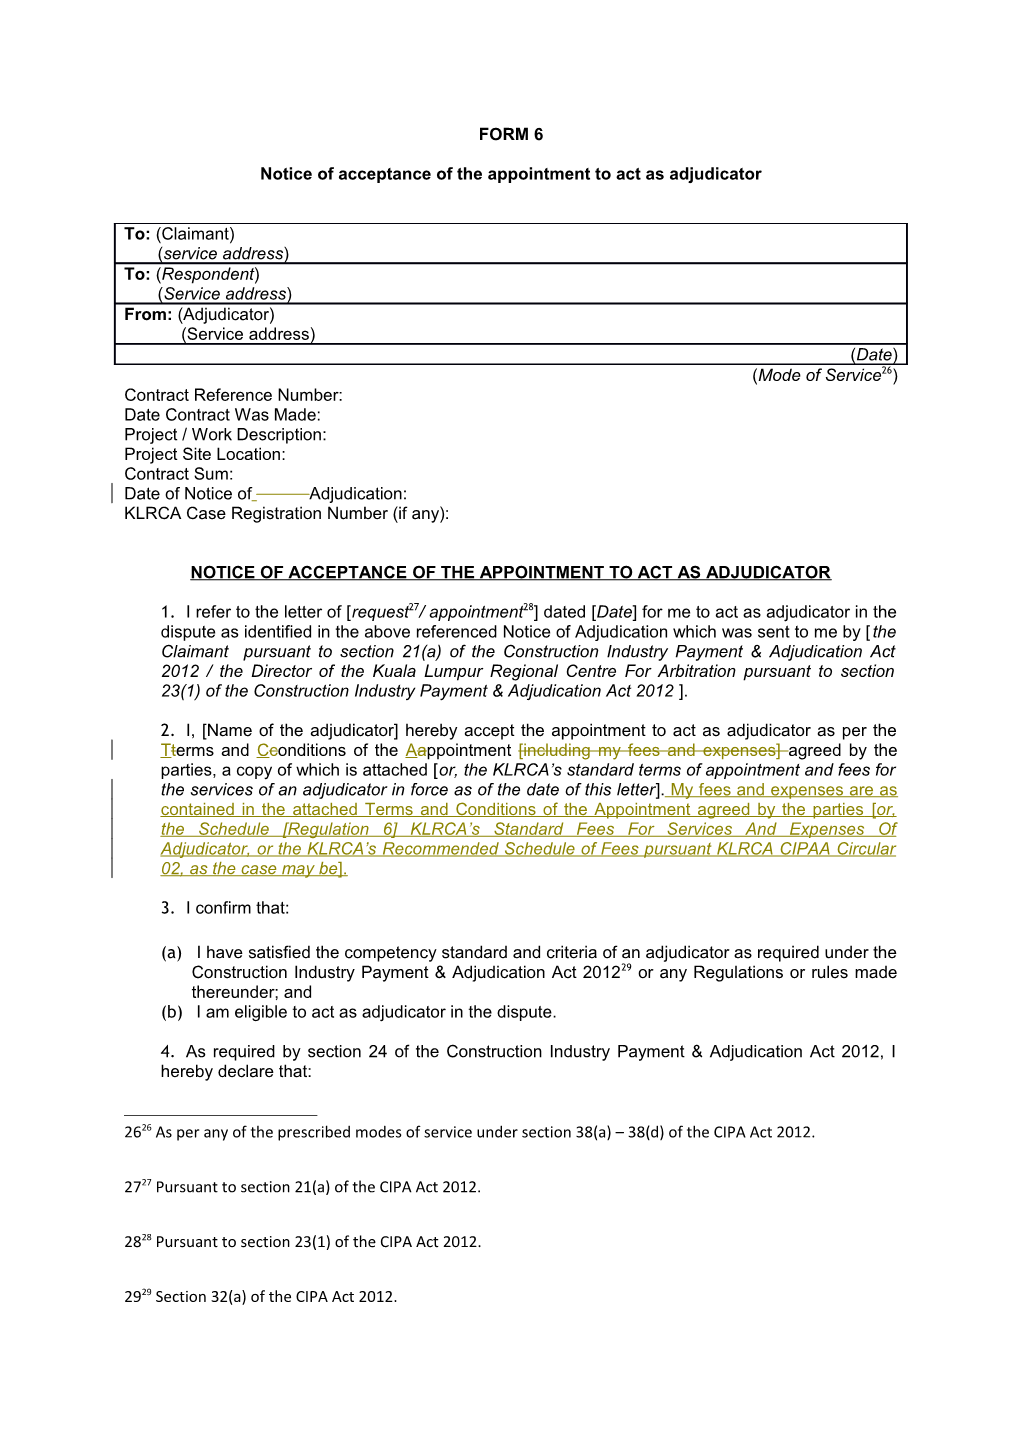 Notice of Acceptance of the Appointment to Act As Adjudicator